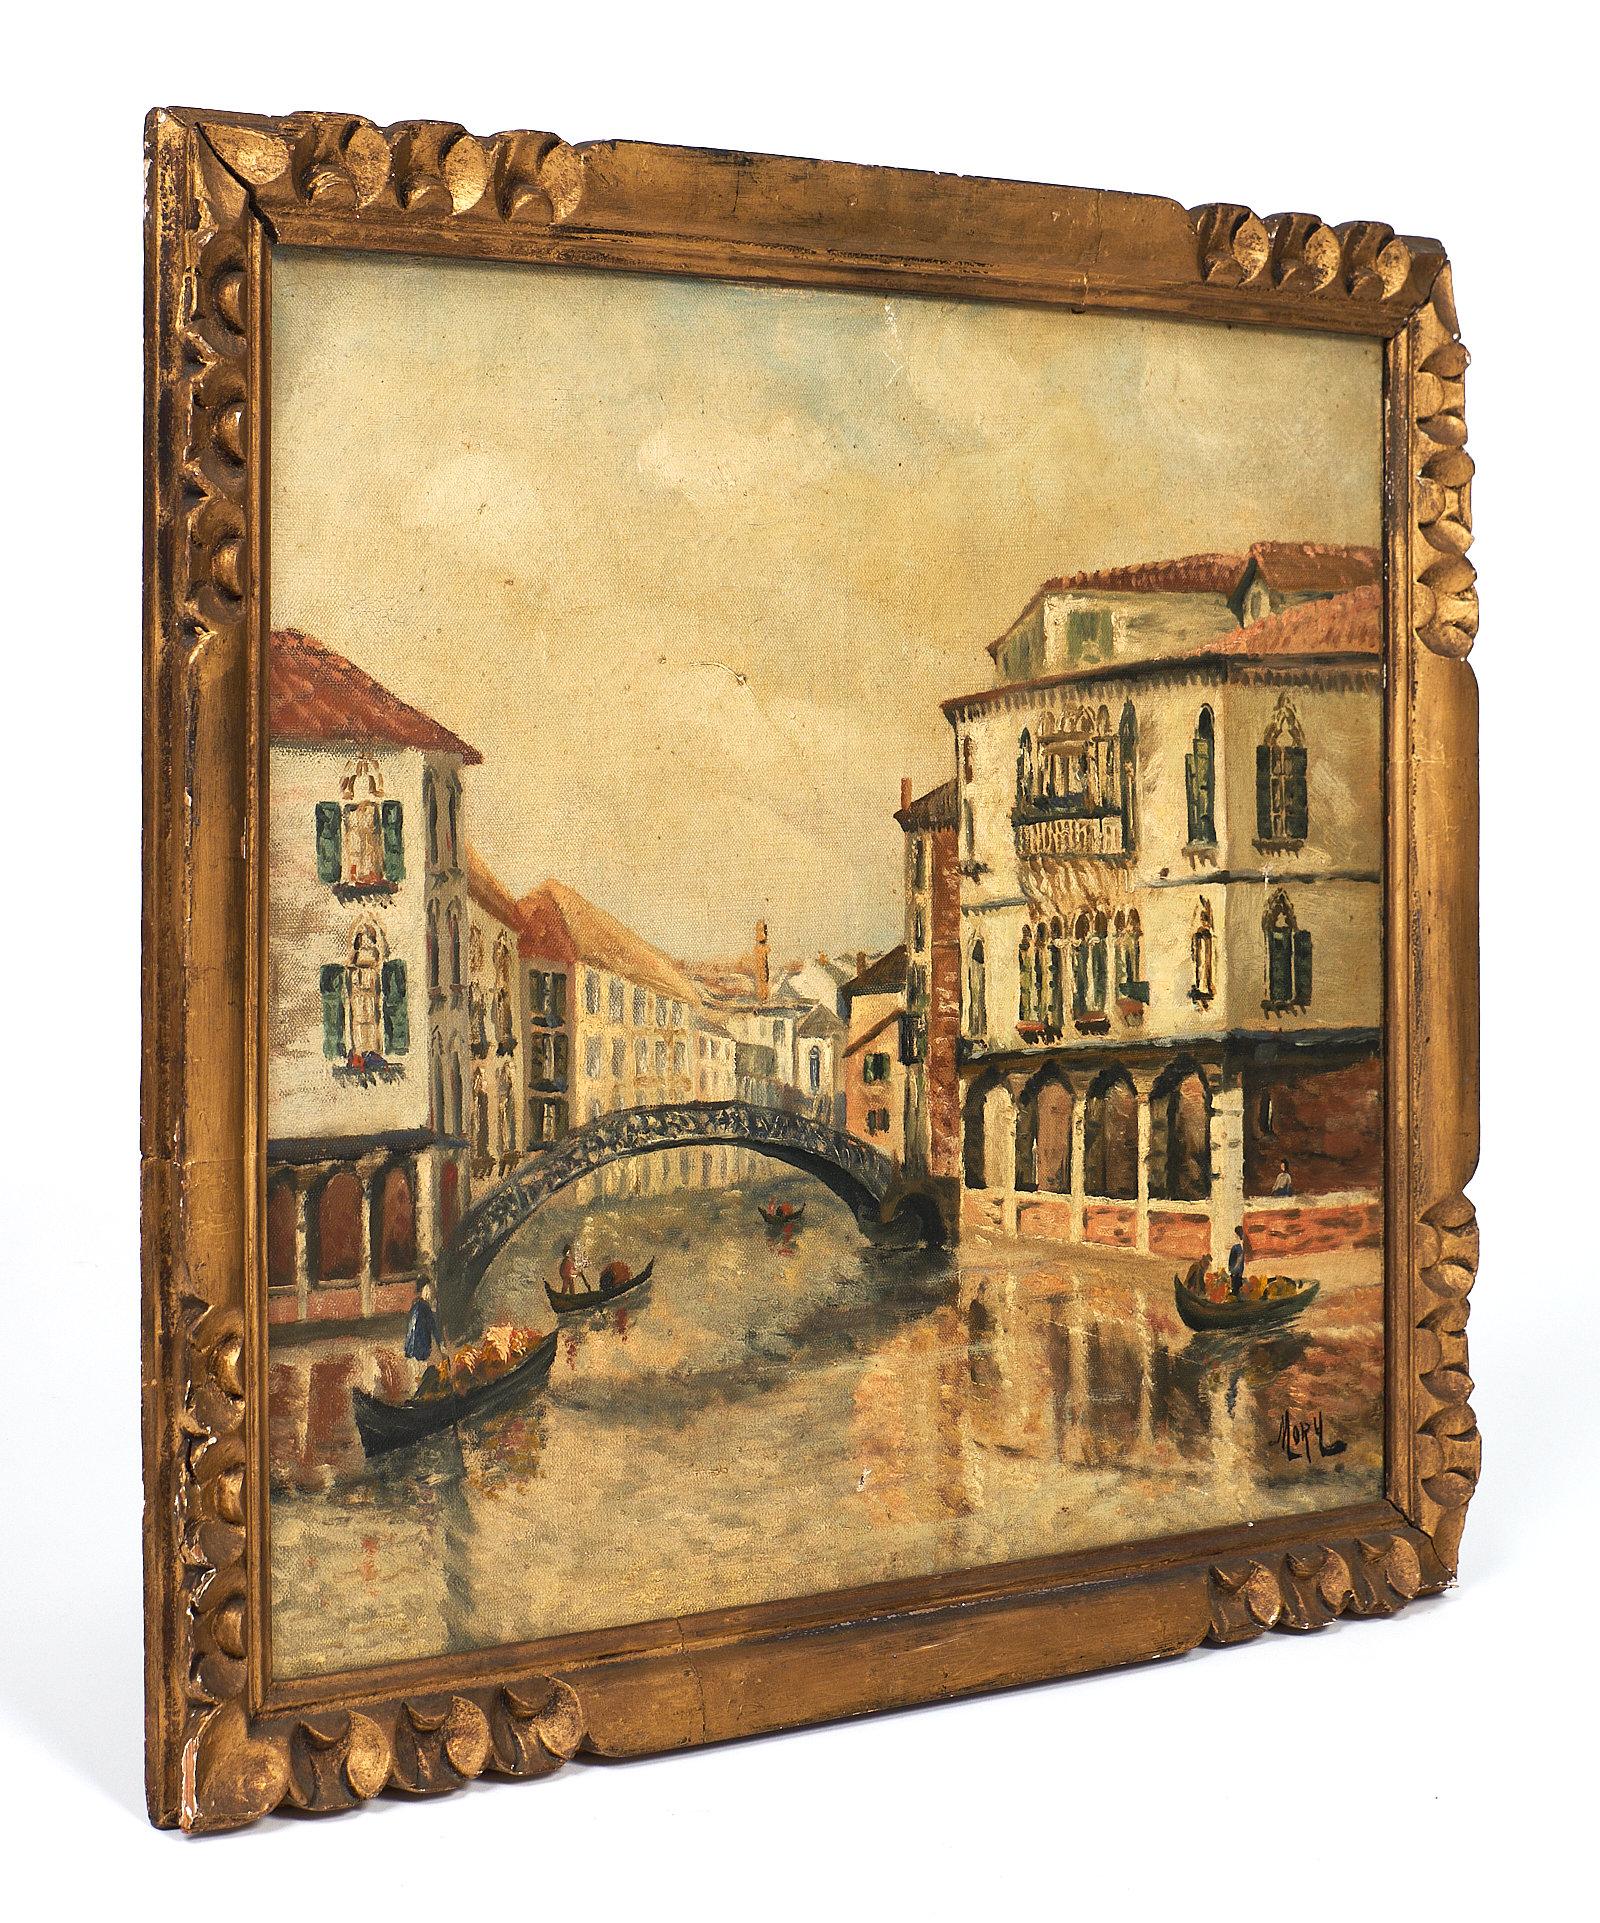 Antique oil on canvas painting of Venice with the original gold leafed frame. The image represents the Castello neighborhood in Venice.